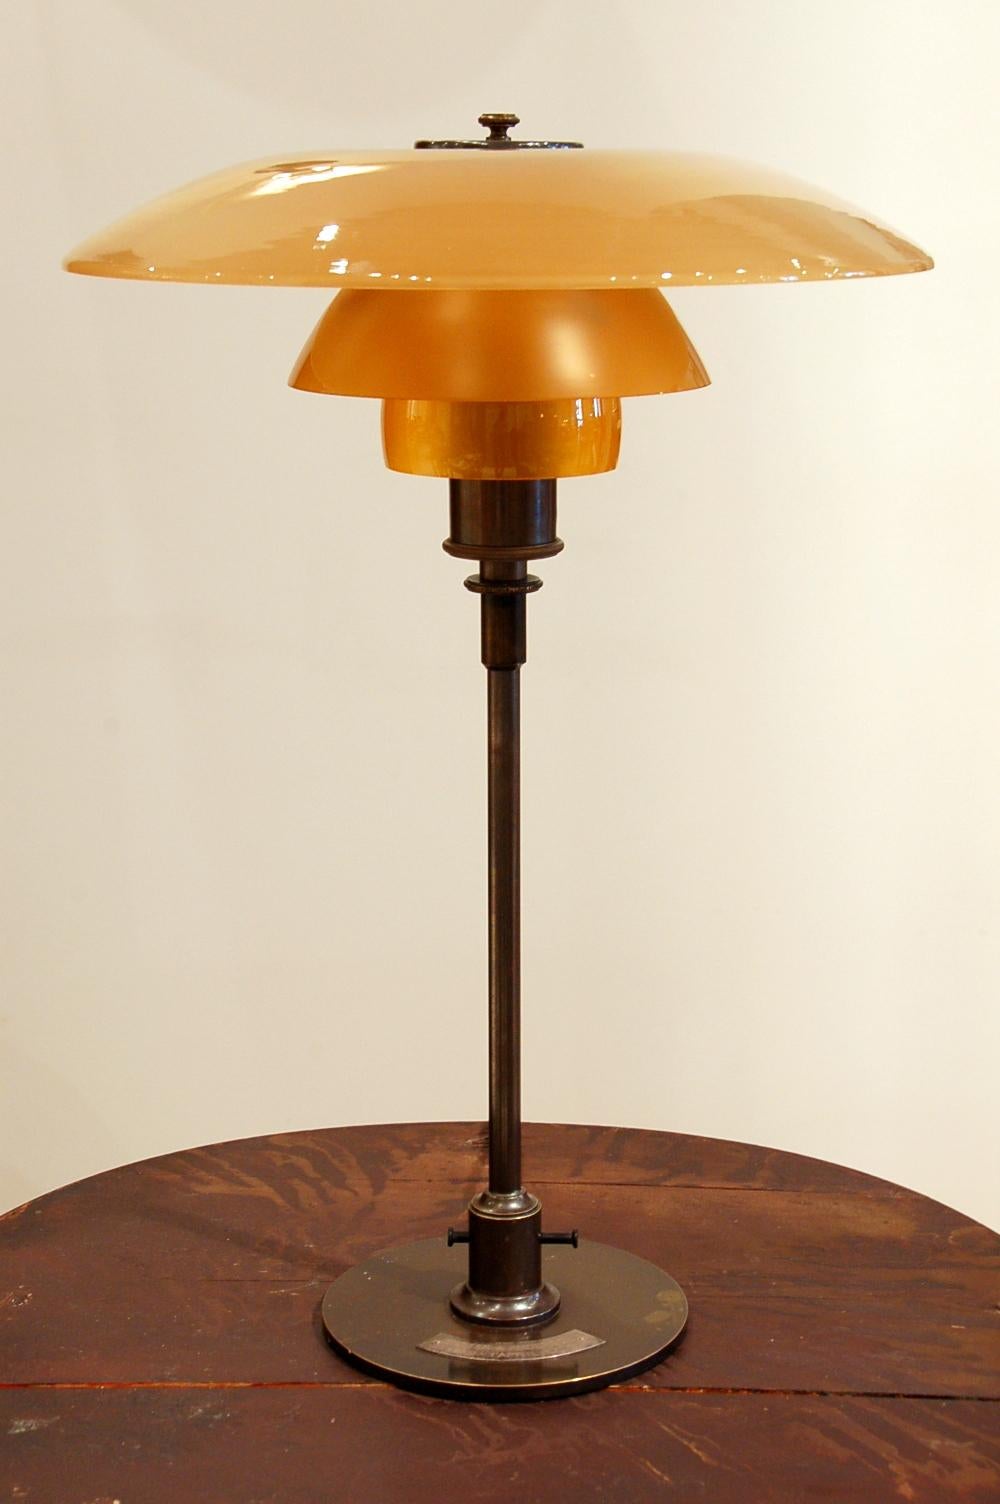 Poul Henningsen (1894 Ordrup, Denmark 1967)
Table light, special commission
4/3 amber shades
Frame with three cast iron legs marked 